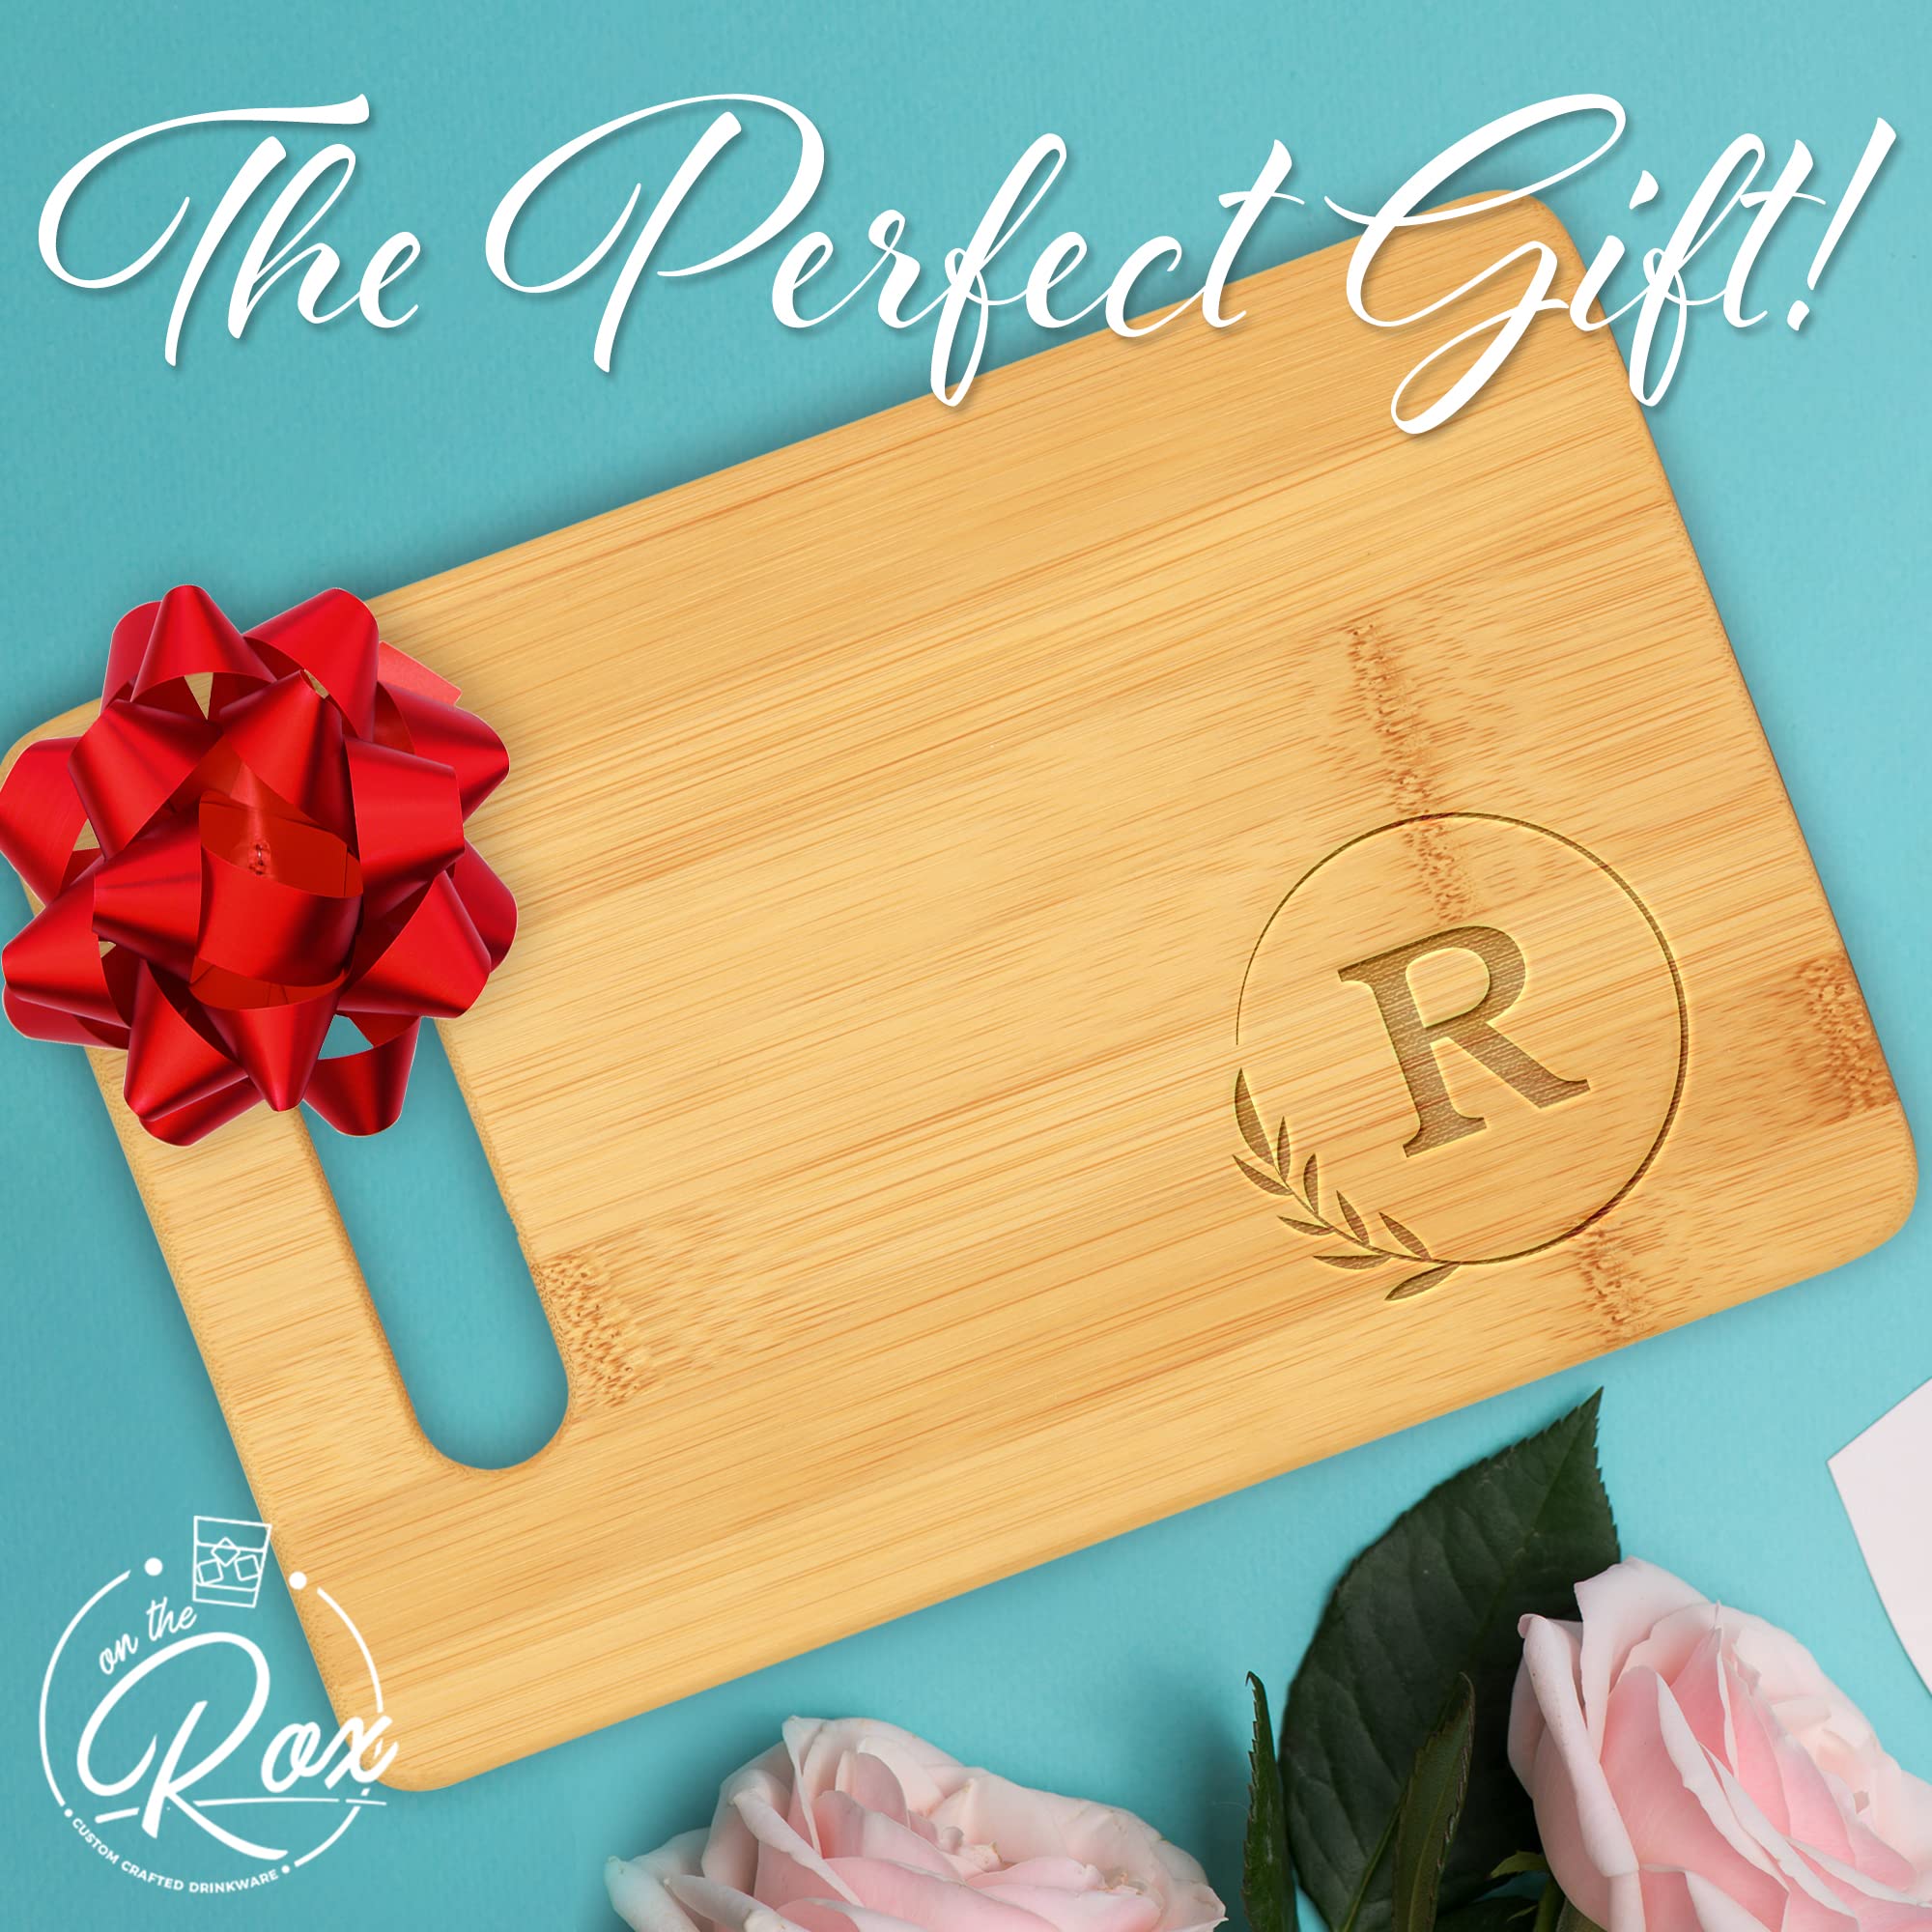 Personalized Cutting Boards - Small Monogrammed Engraved Cutting Board (R) - 9x6 Customized Bamboo Cutting Board with Initials - Wedding Kitchen Gift - Wooden Custom Charcuterie Boards by On The Rox